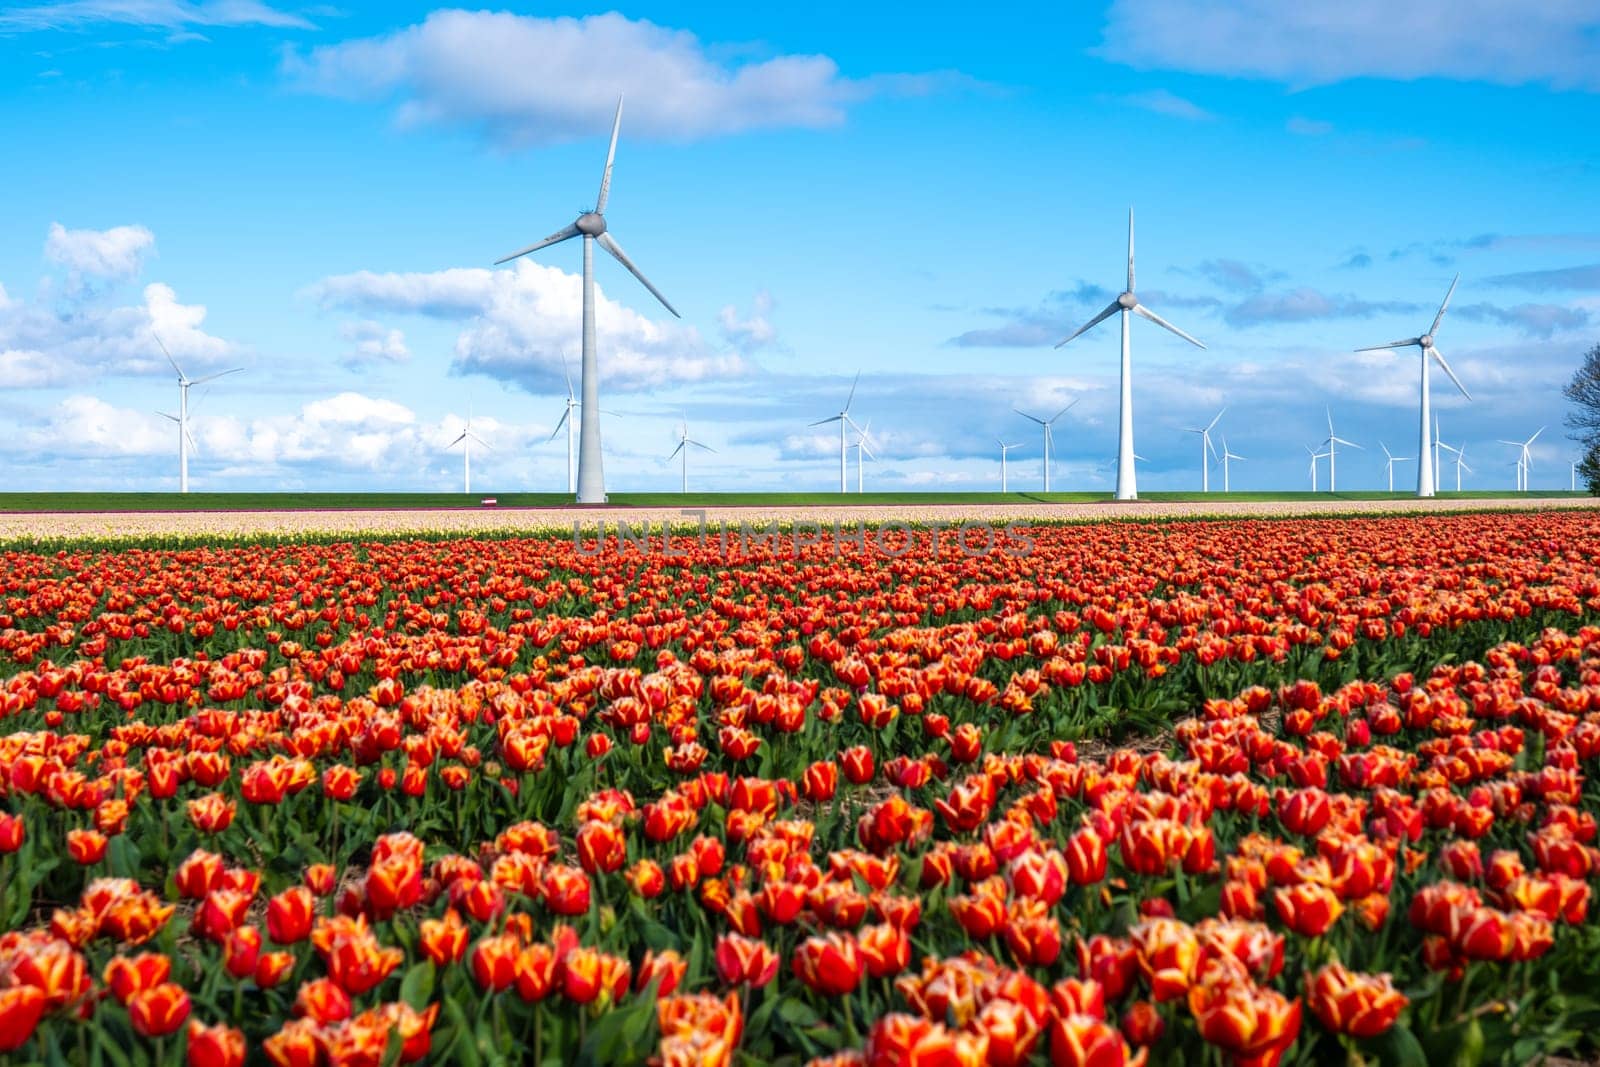 A vast field of red and yellow tulips in full bloom swaying gently in the wind, with iconic windmill turbines standing tall in the background in the Noordoostpolder Netherlands